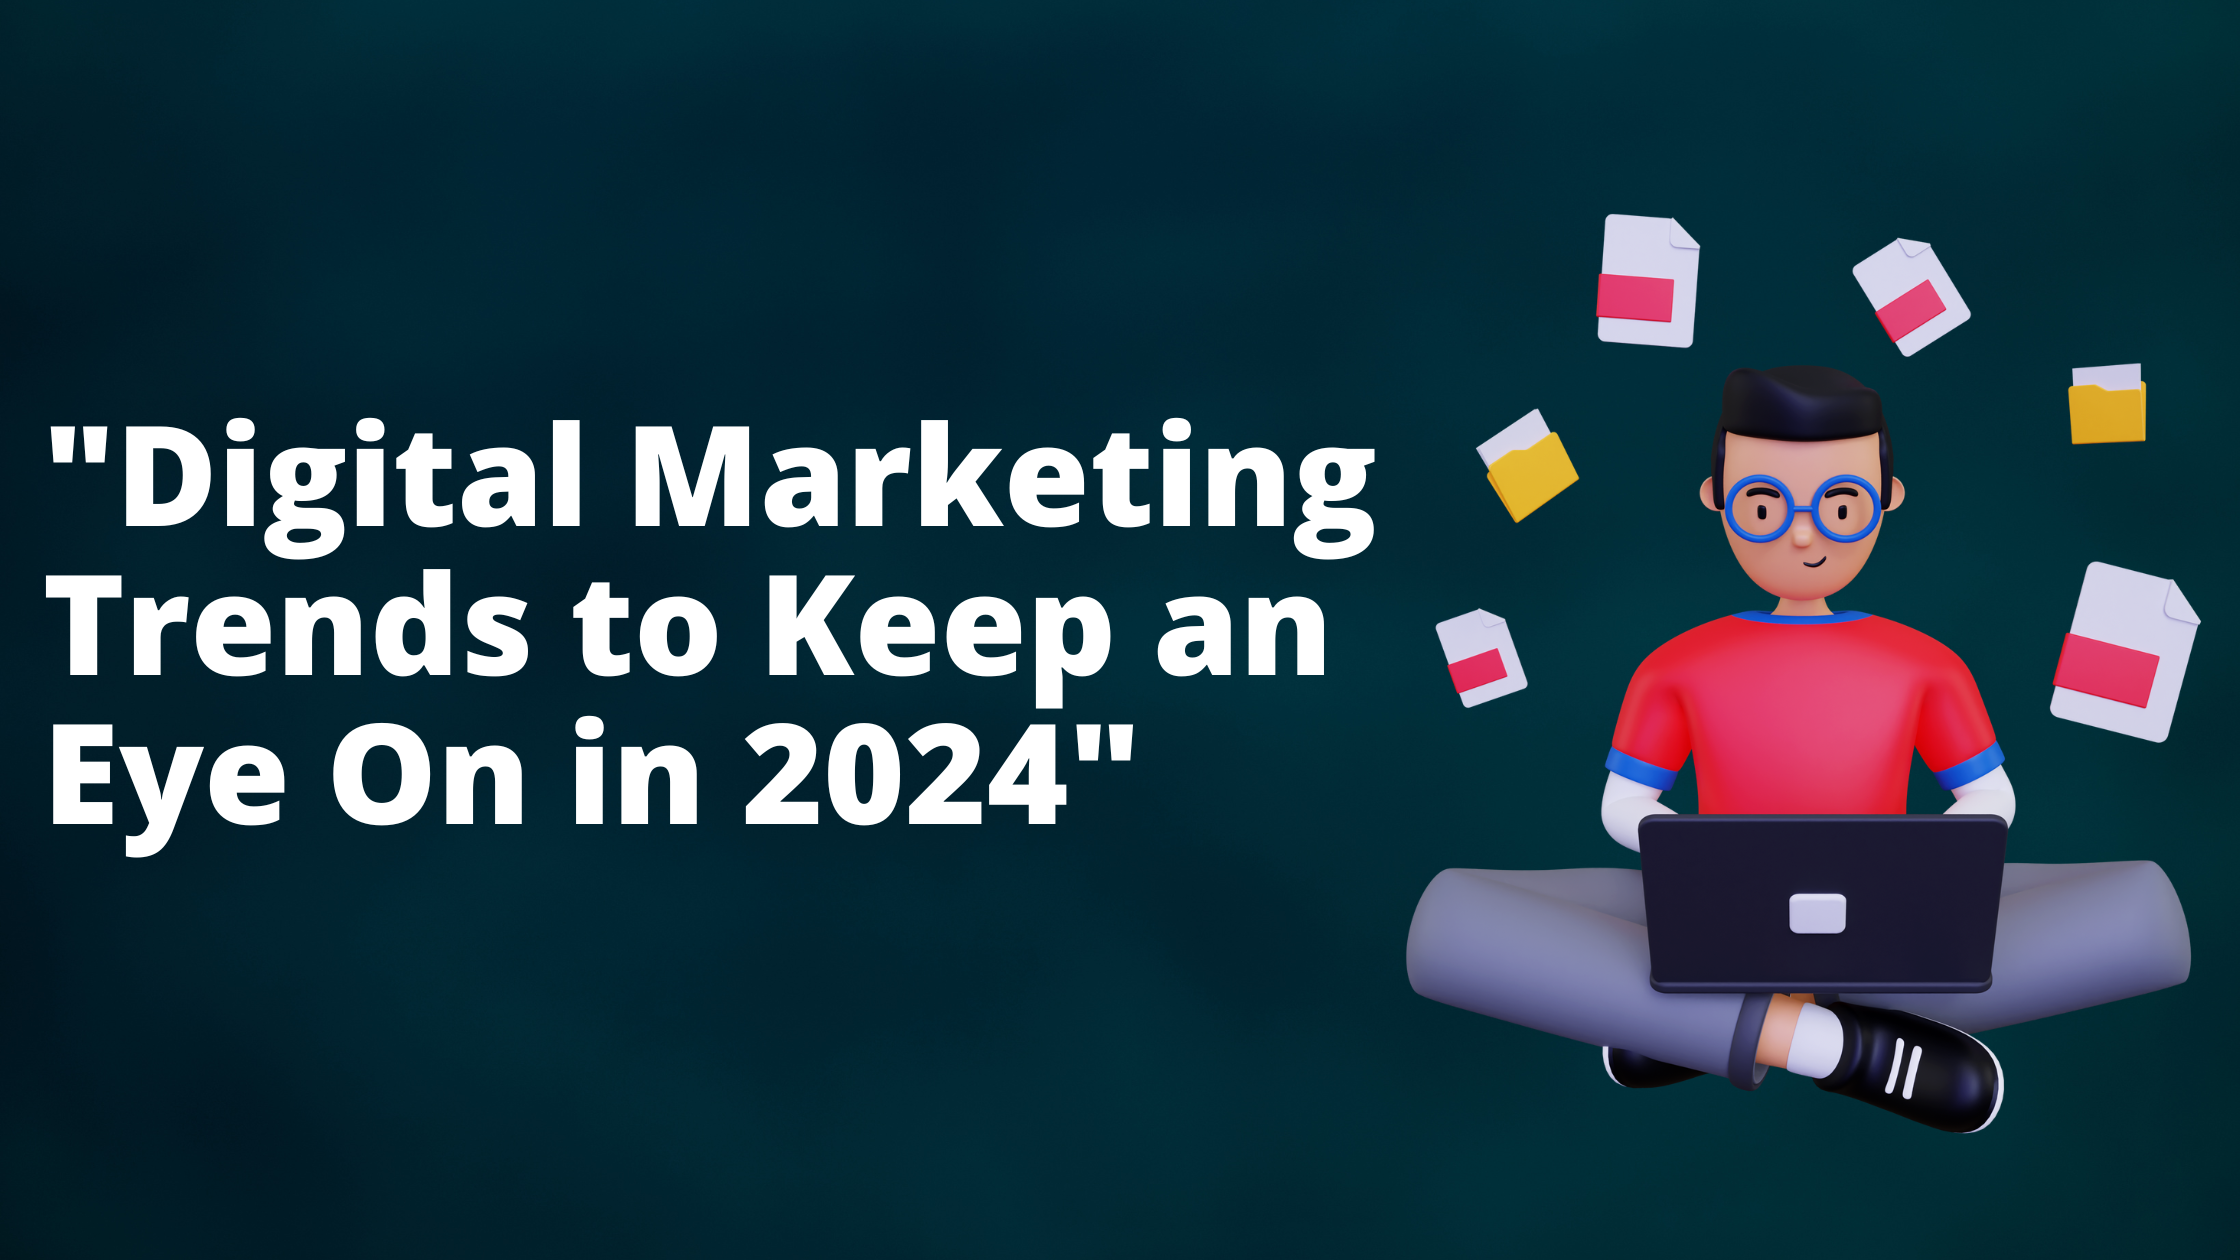 Digital Marketing Trends to Keep an Eye On in 2024